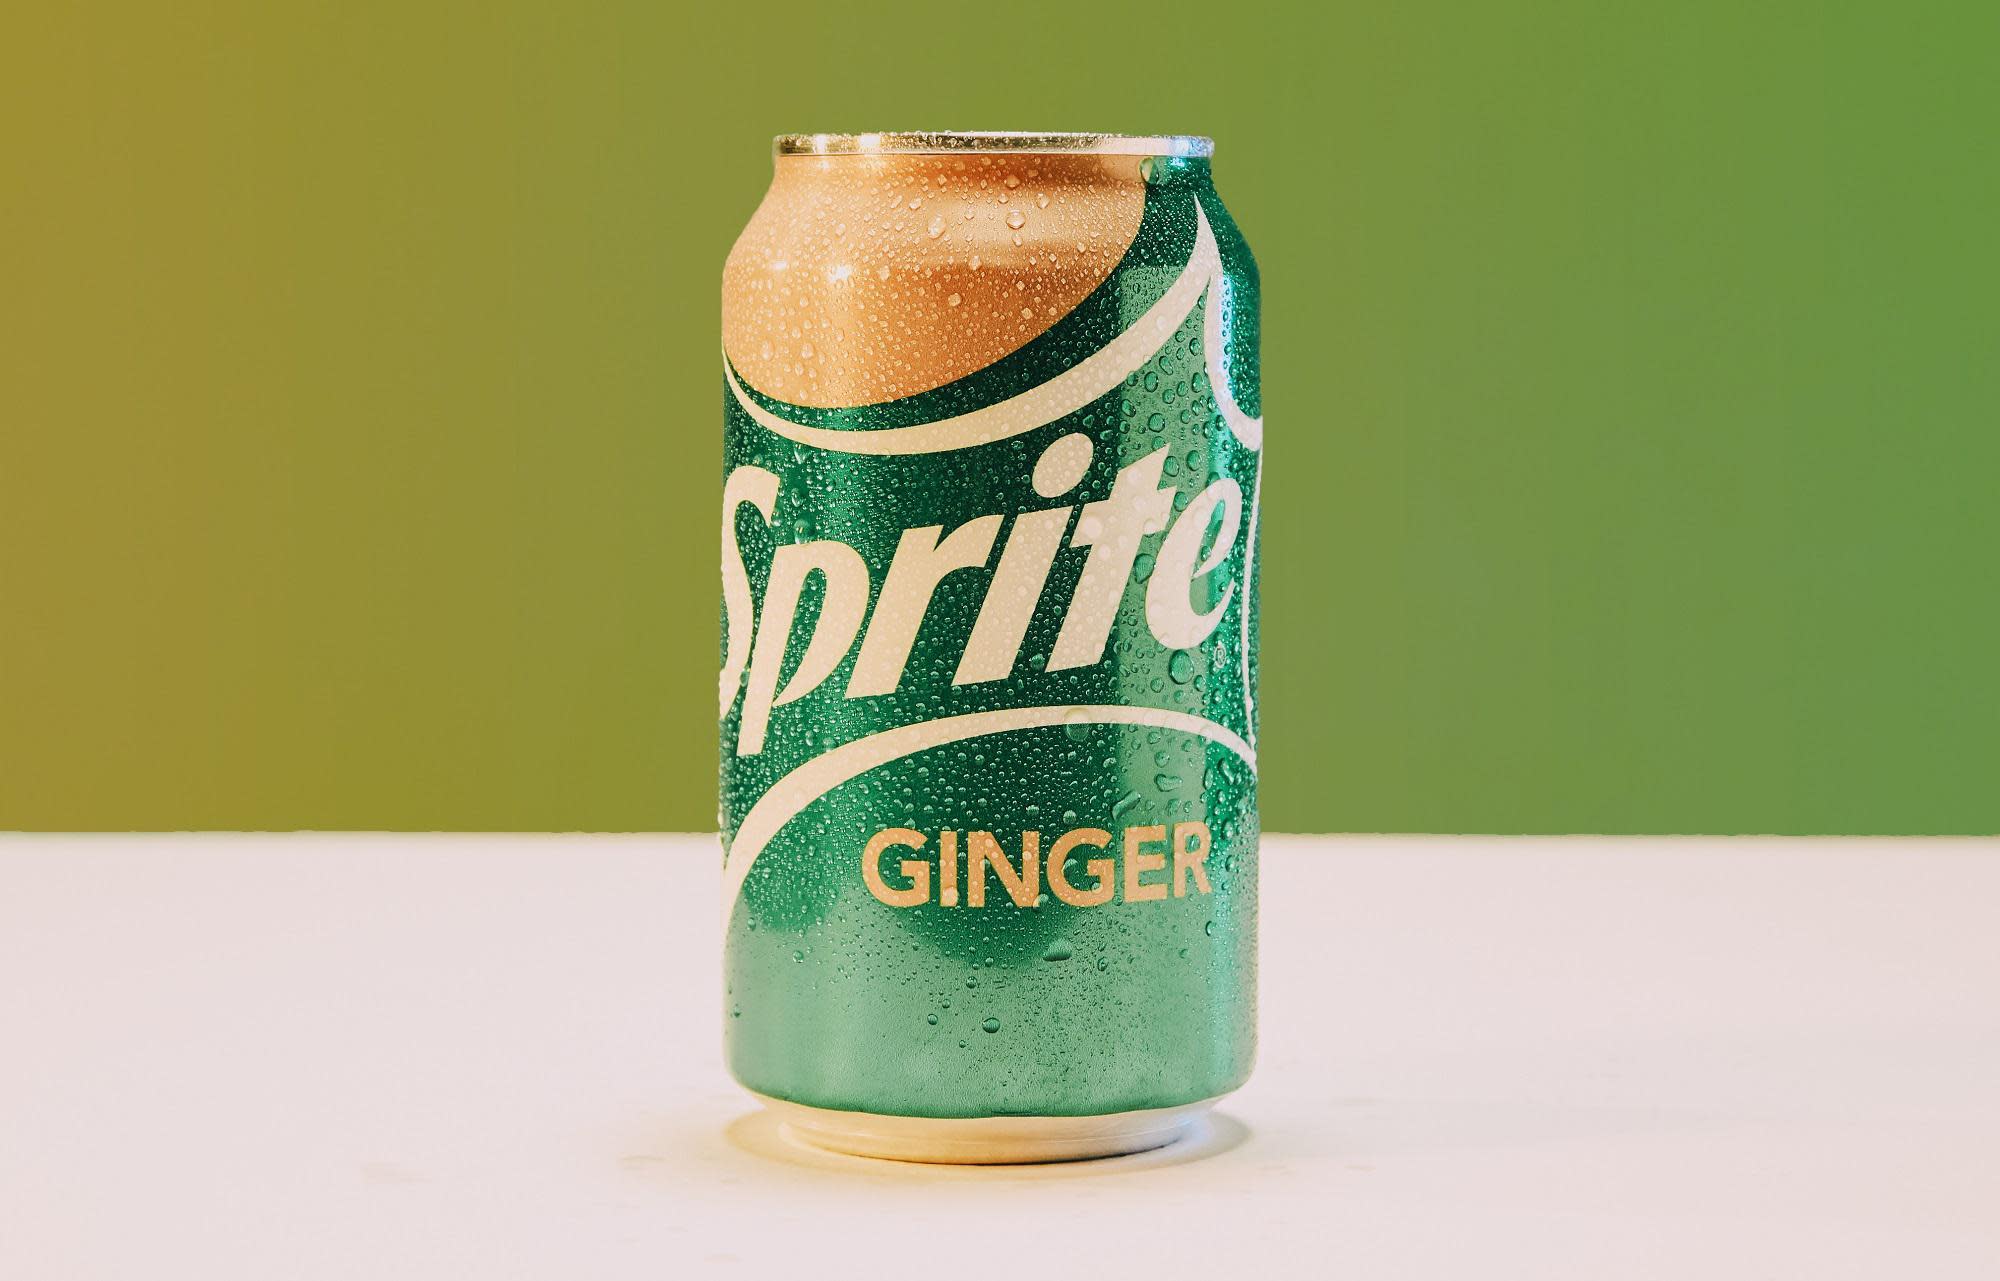 Sprite just launched a new flavor, and we tried it